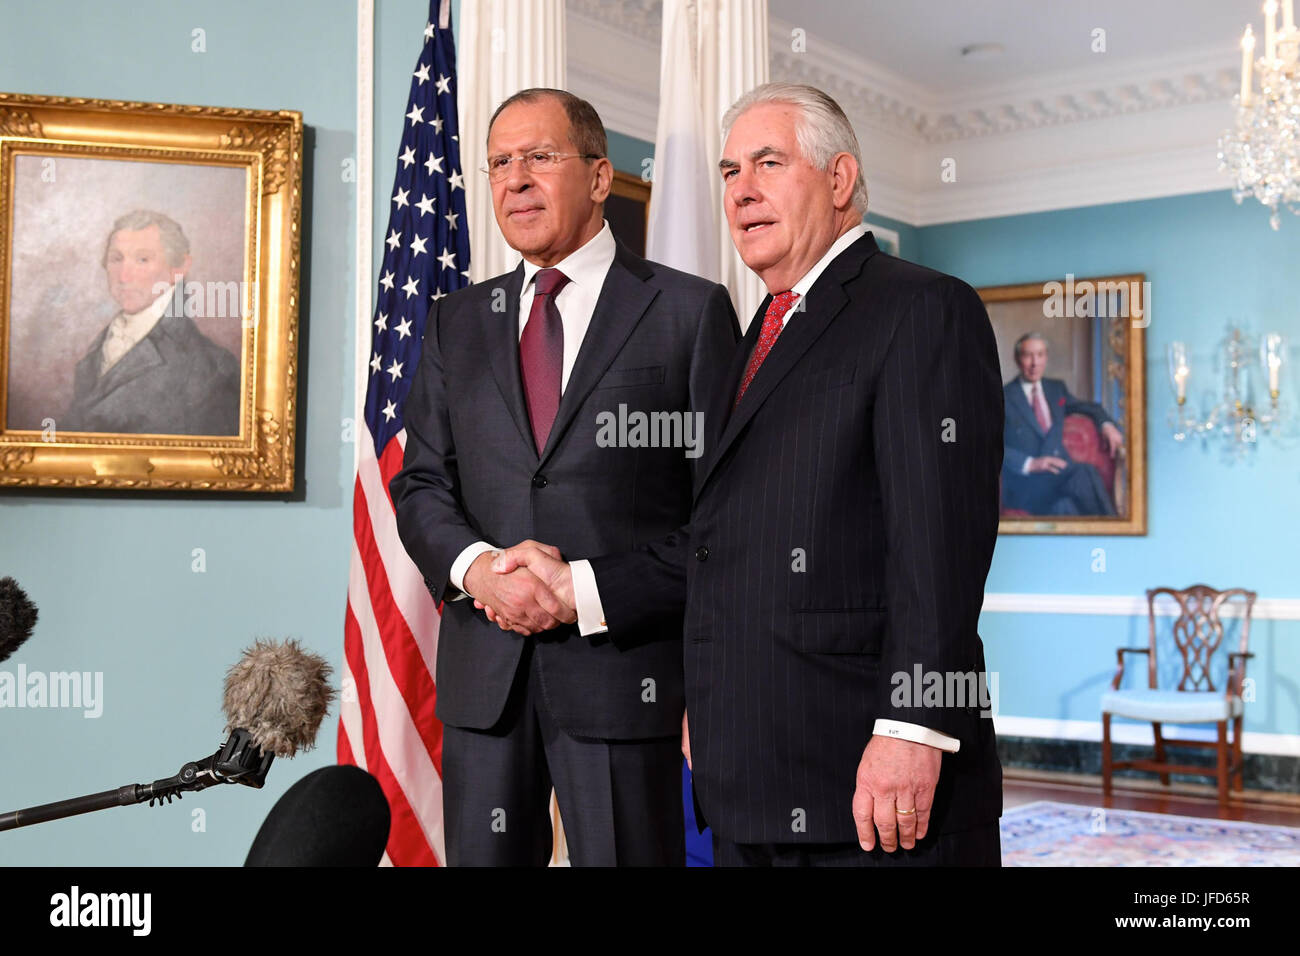 U.S. Secretary of State Rex Tillerson and Russian Foreign Minister Sergey Lavrov shake hands before their bilateral meeting at the U.S. Department of State in Washington, D.C., on May 10, 2017. Stock Photo